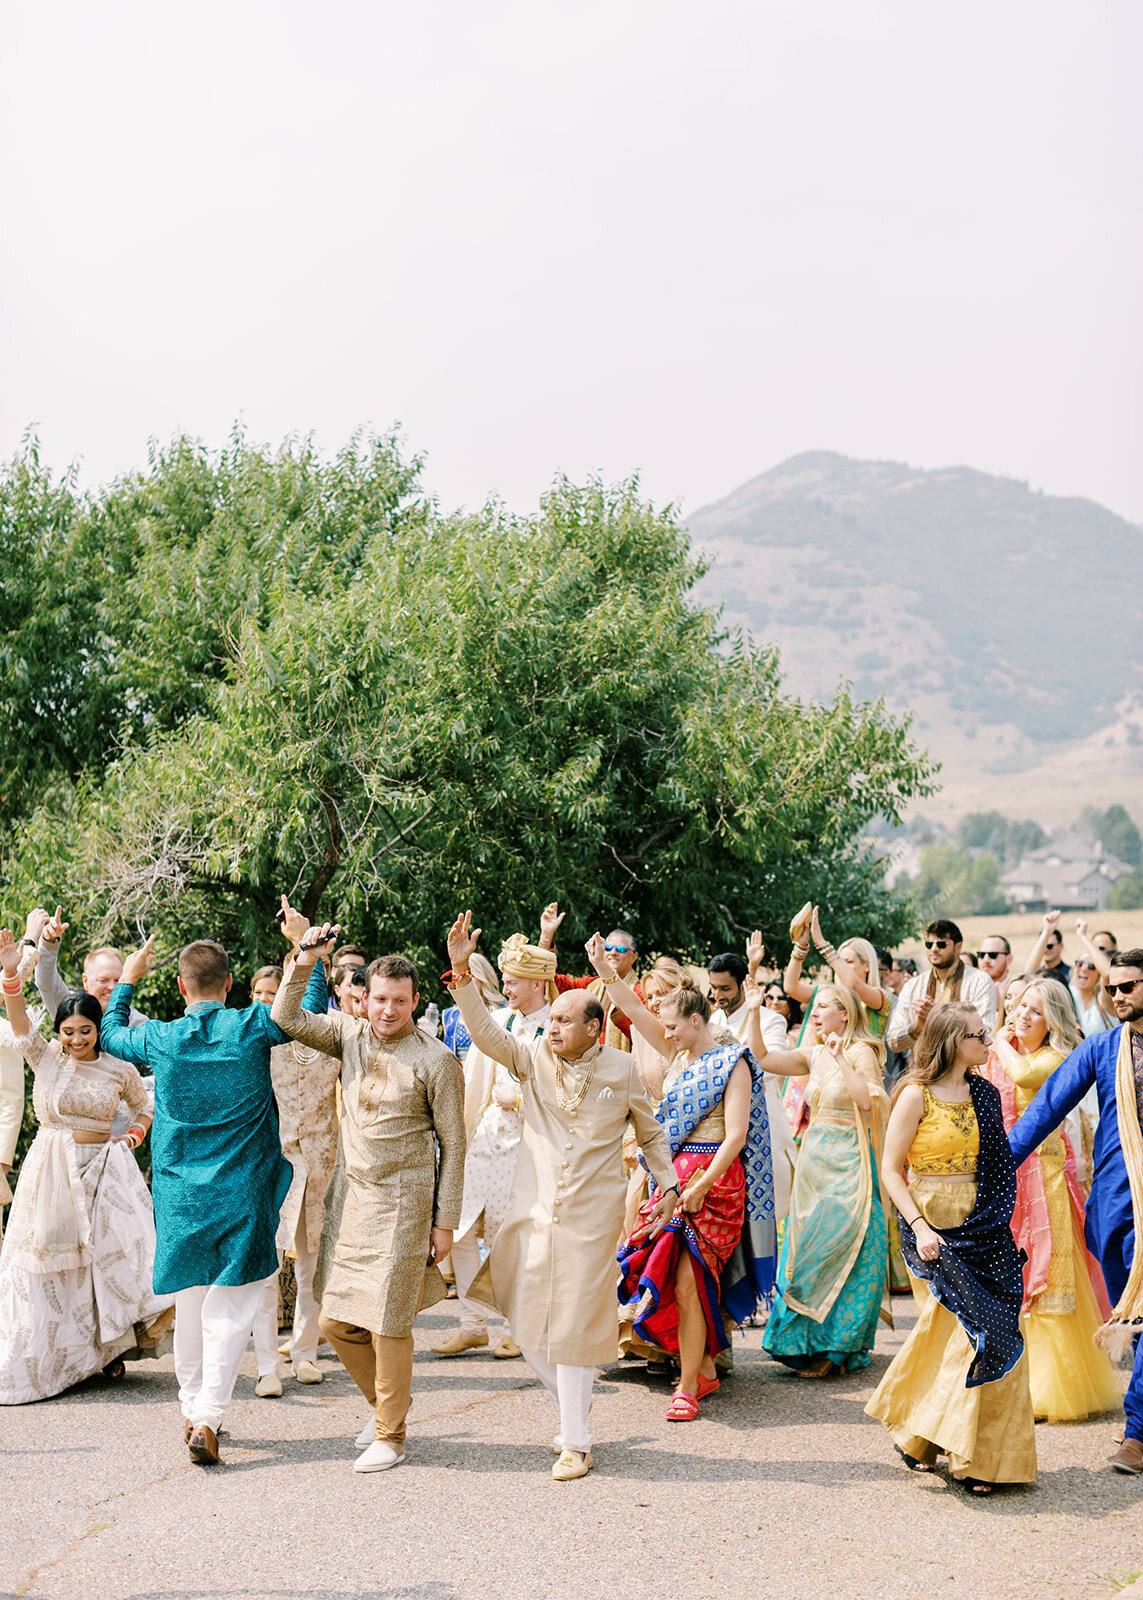 Traditional dancing at a South Asian Fusion wedding at an outdoor venue in Colorado